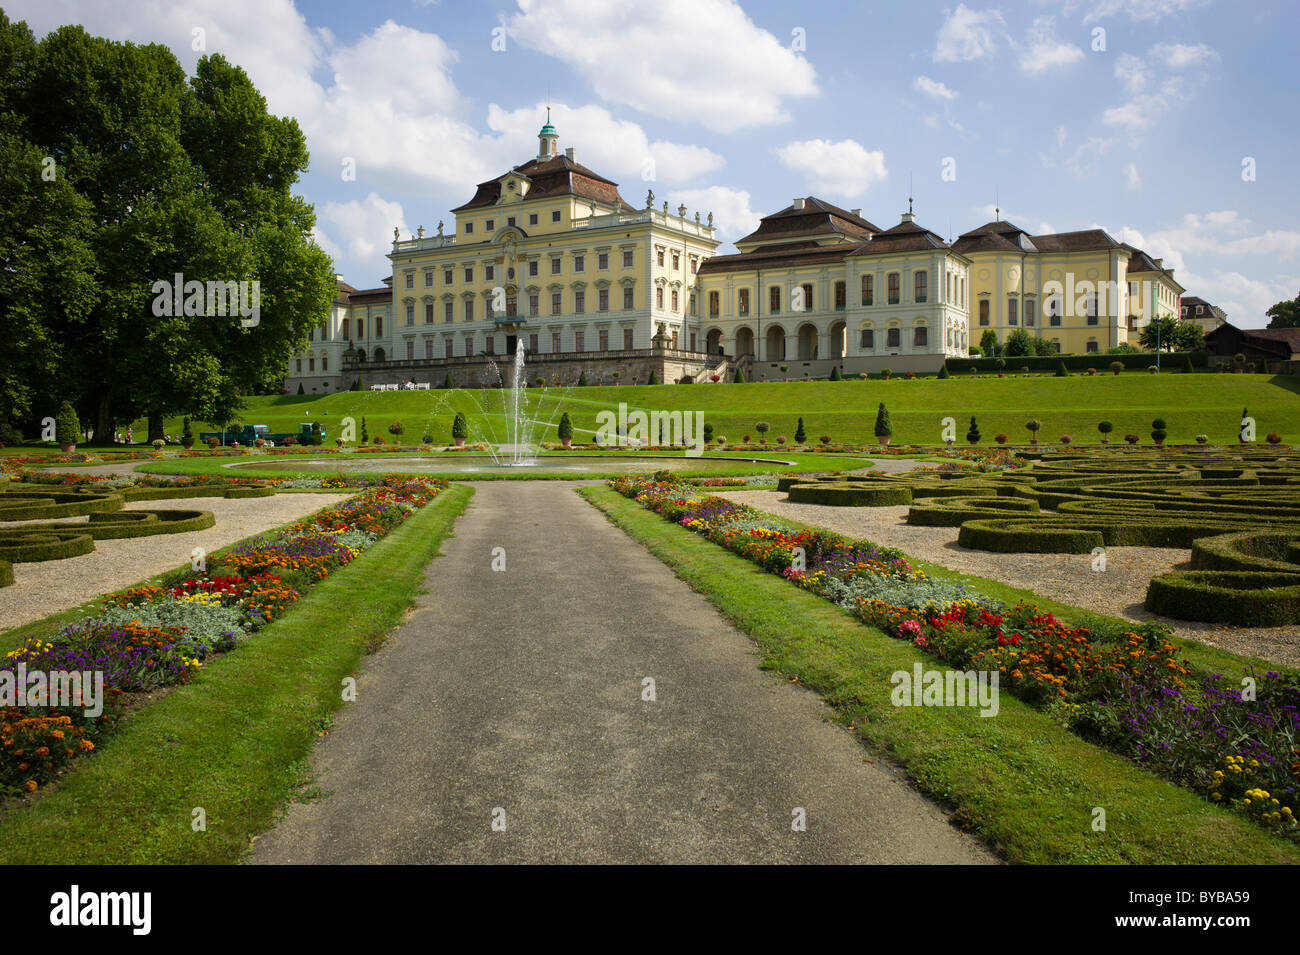 The Old Corps de Logis, Schloss Ludwigsburg Castle, north facing gardens, Ludwigsburg, Baden-Wuerttemberg, Germany, Europe. Stock Photo